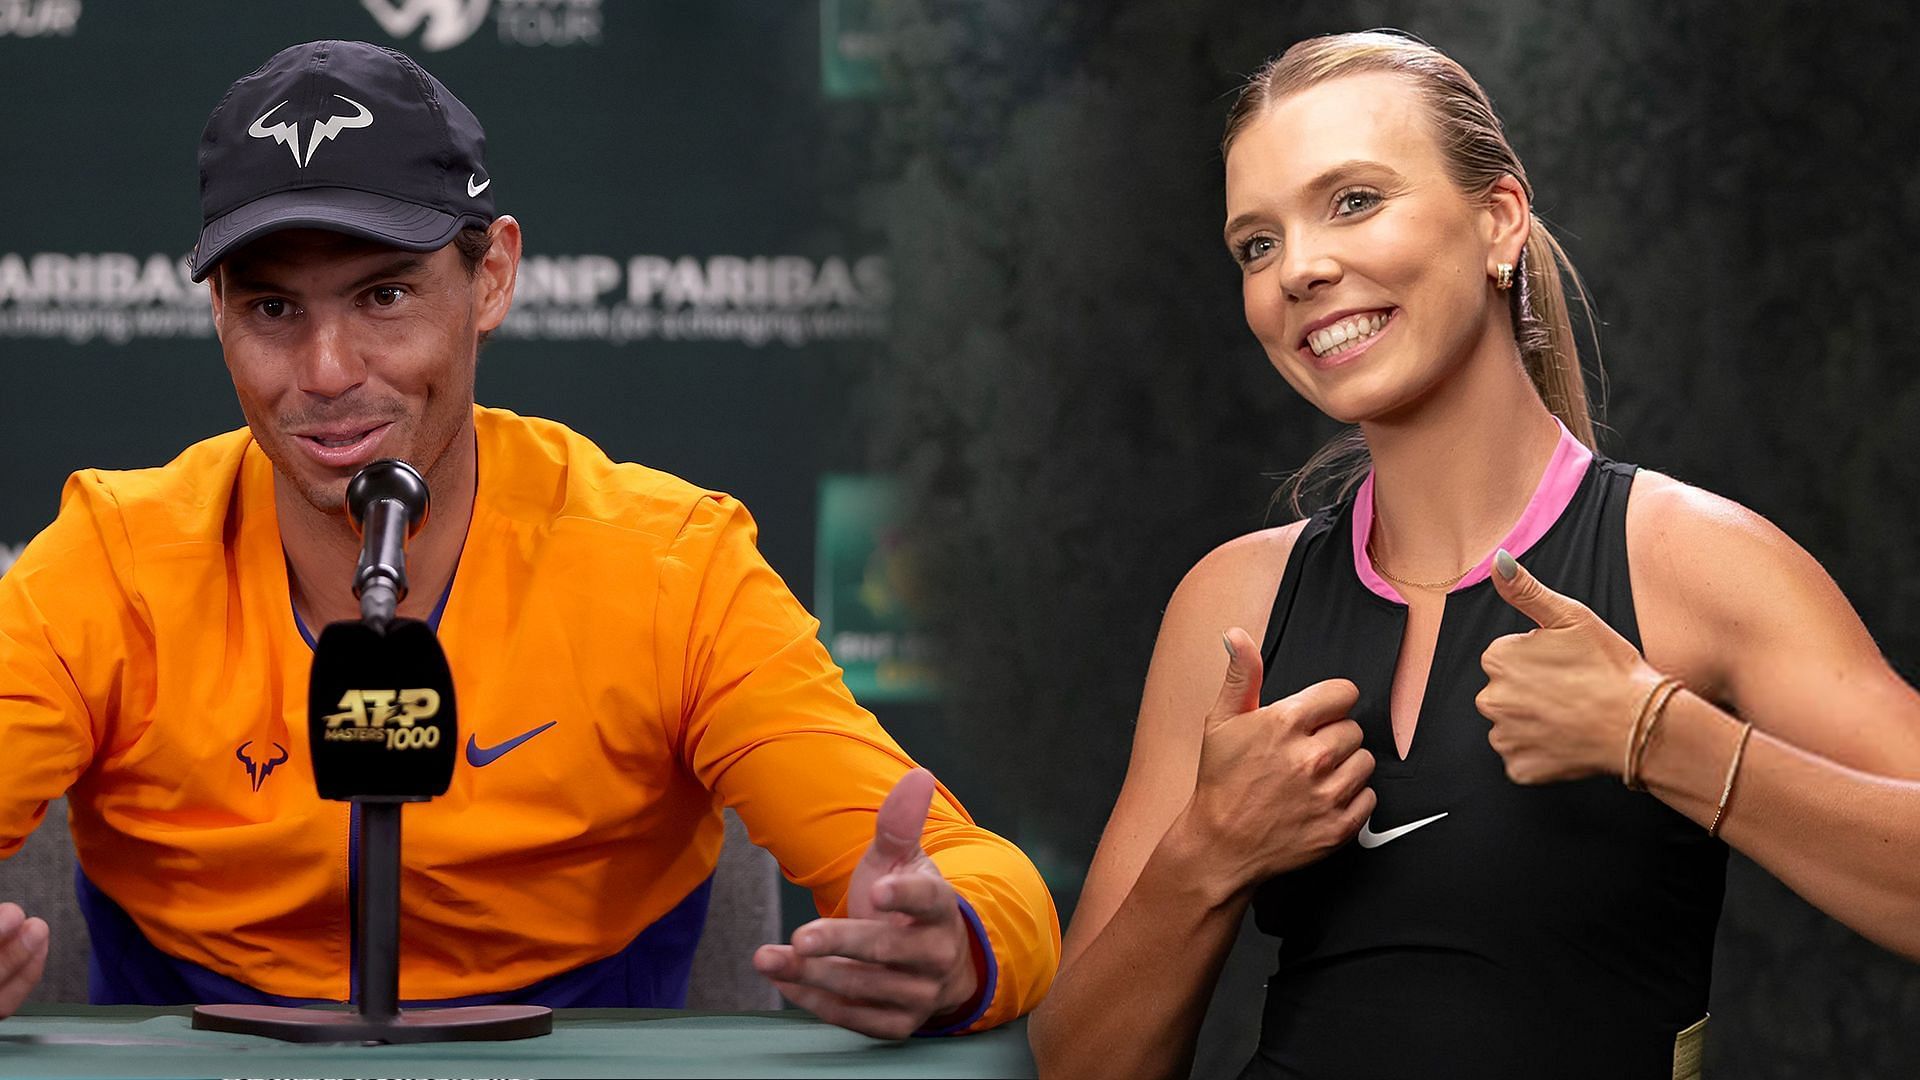 Rafael Nadal's wisdom motivates Katie Boulter to shake off Madrid Open 1R exit ahead of Italian Open campaign